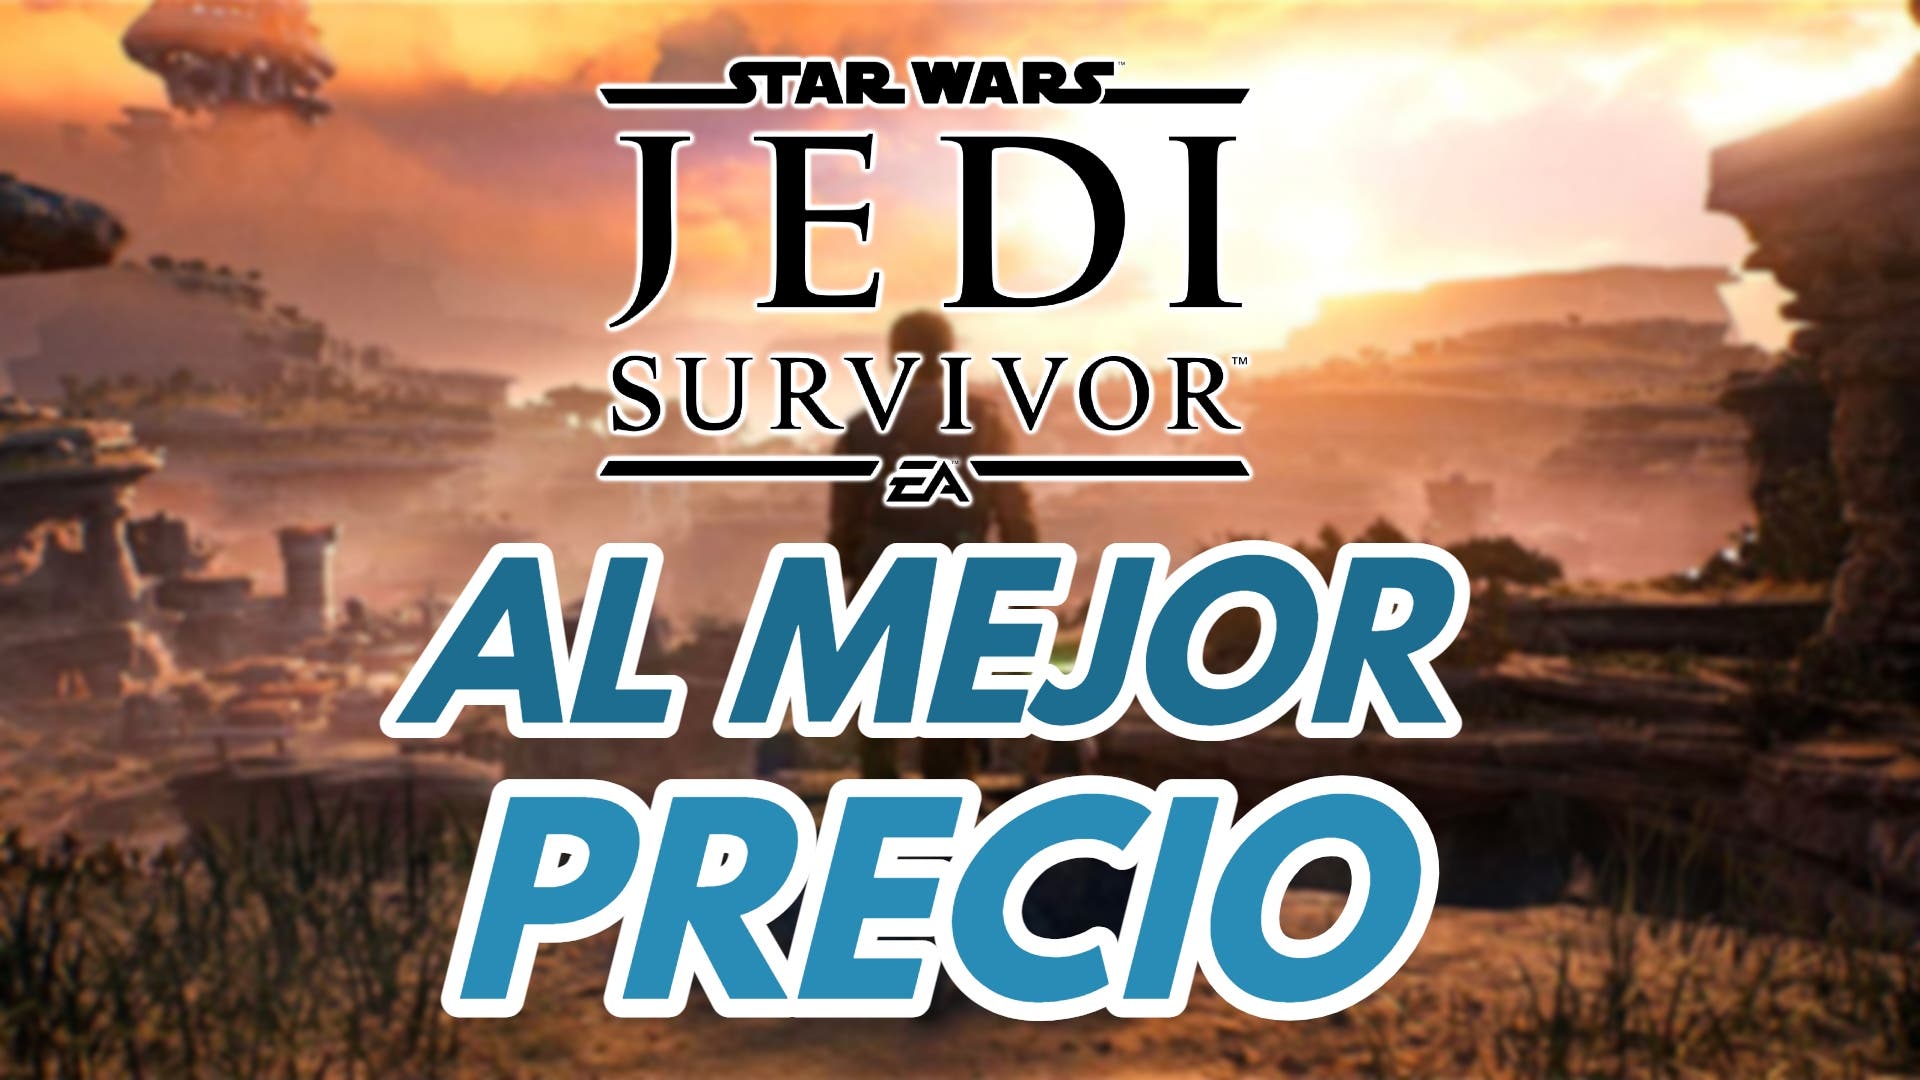 Where to buy Star Wars Jedi: Survivor and its editions at the best price before its release